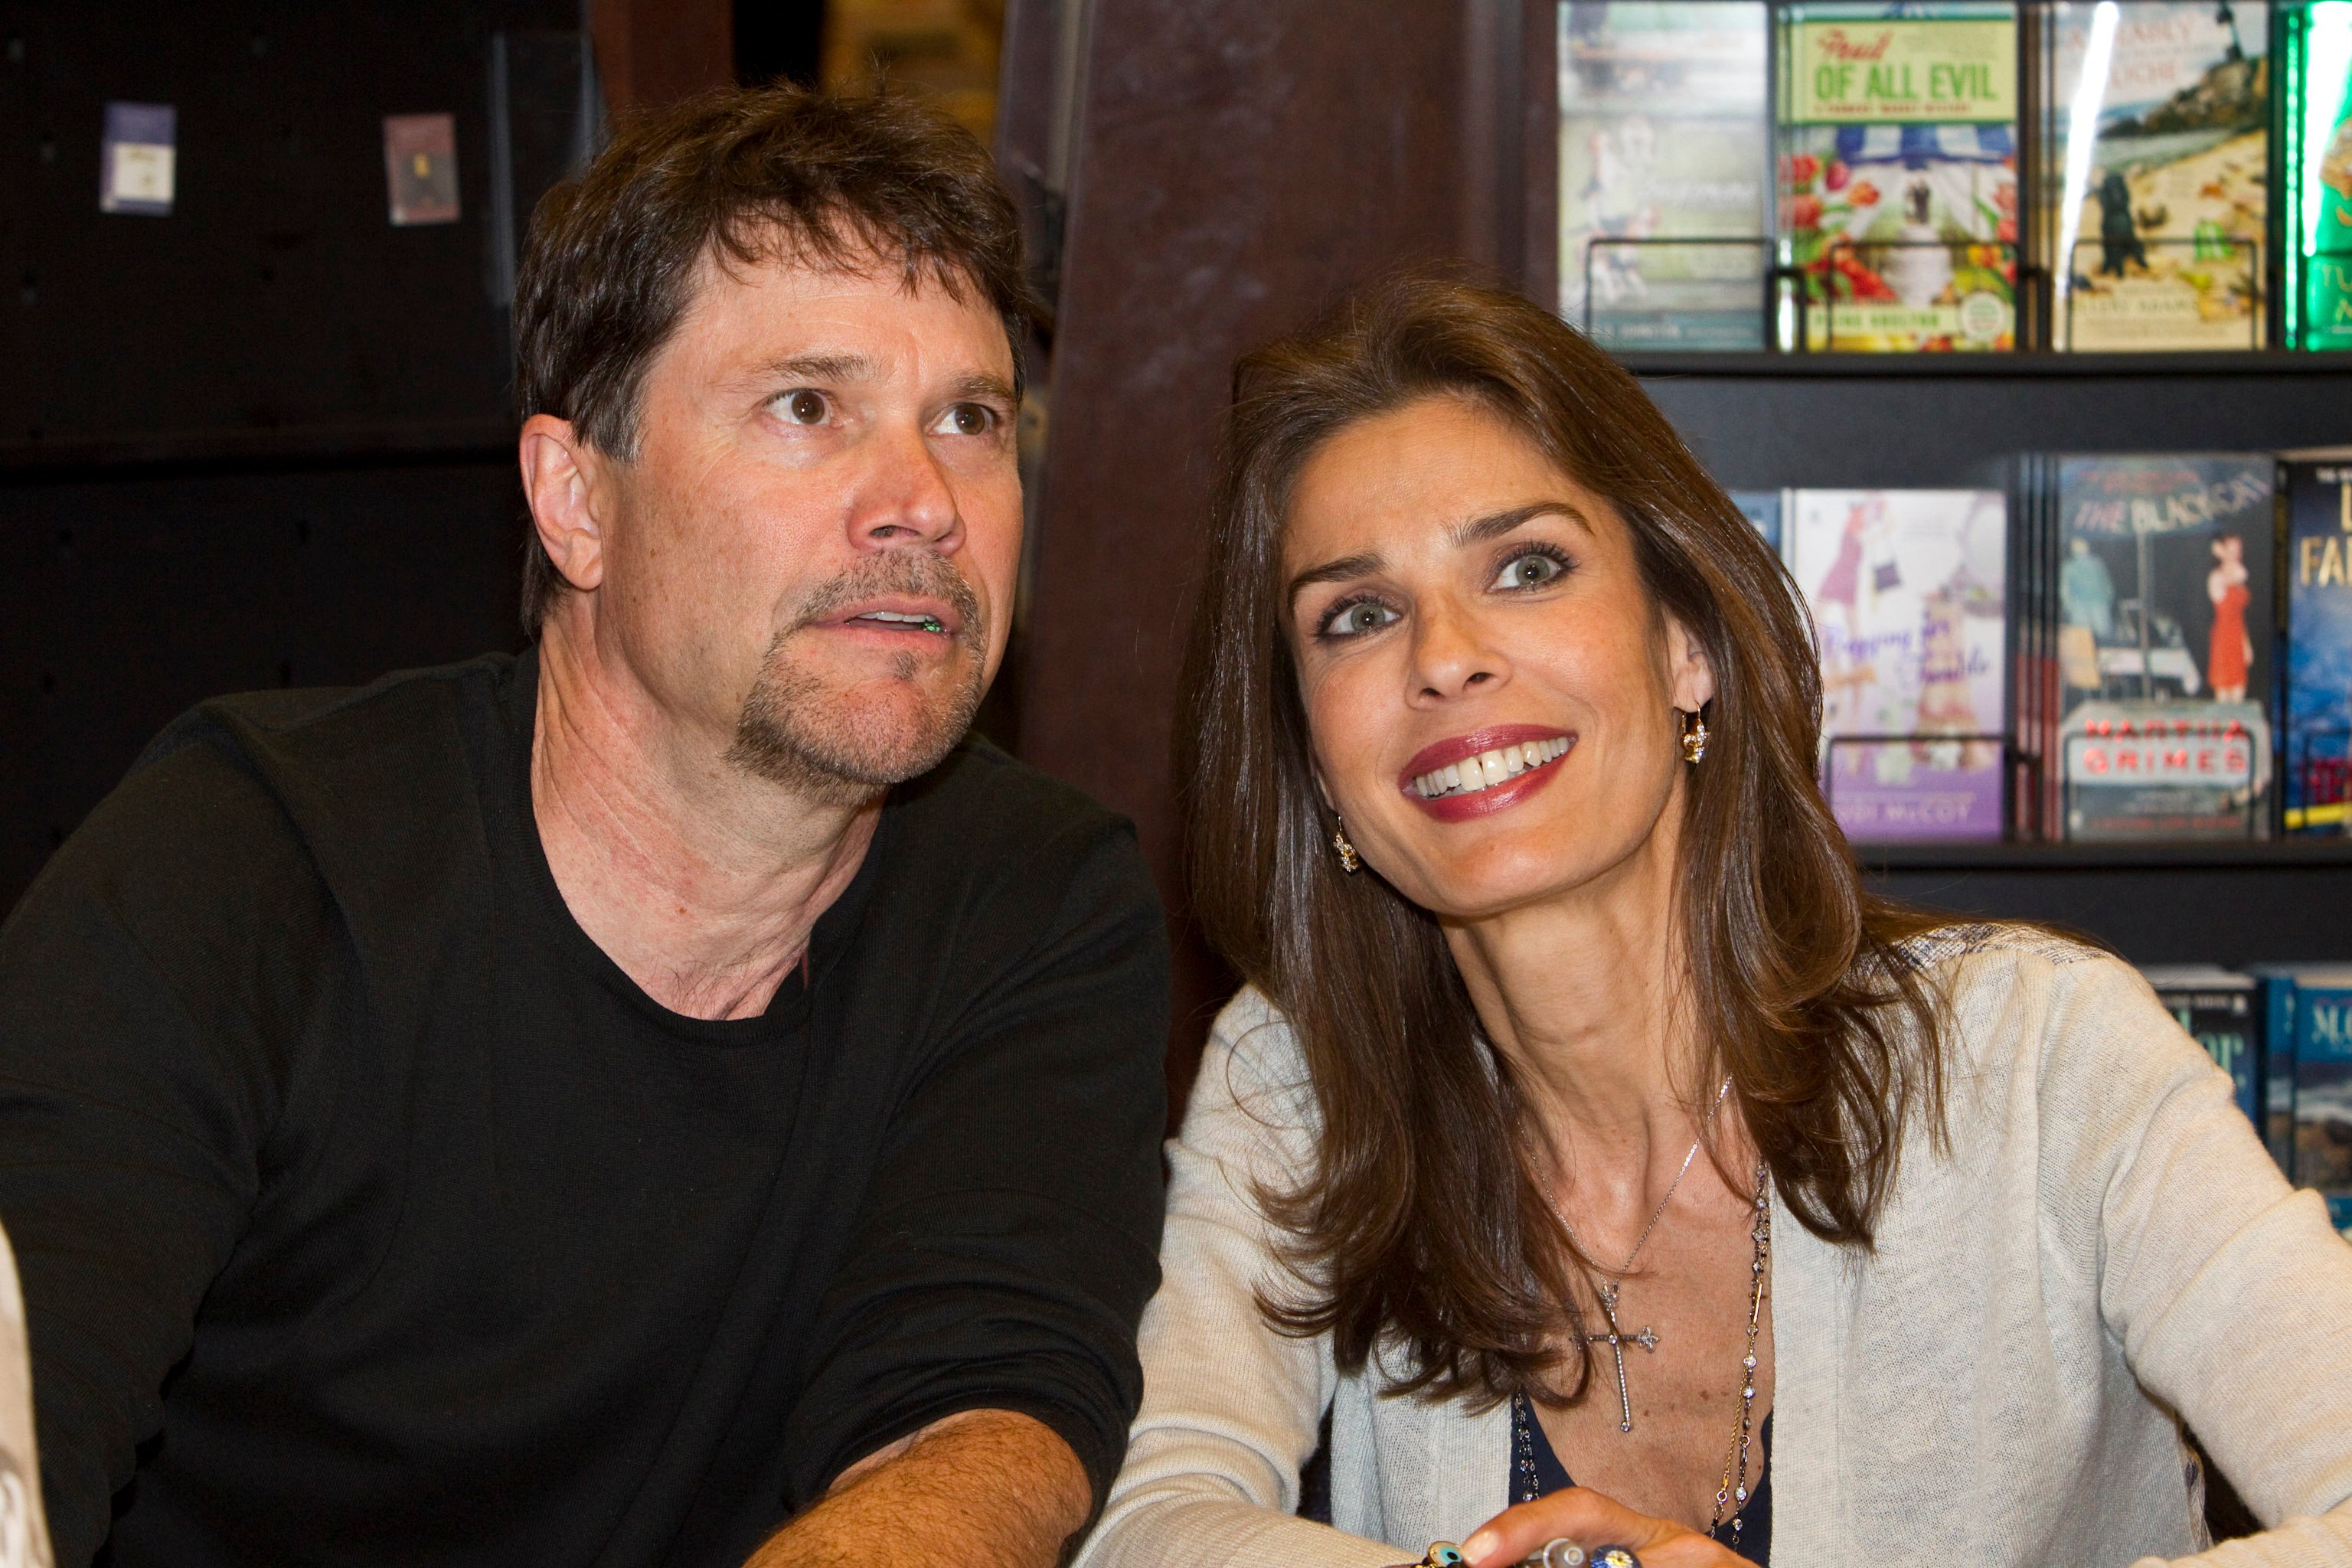 'Days of Our Lives' stars Peter Reckell and Kristian Alfonso posing together during a book signing.